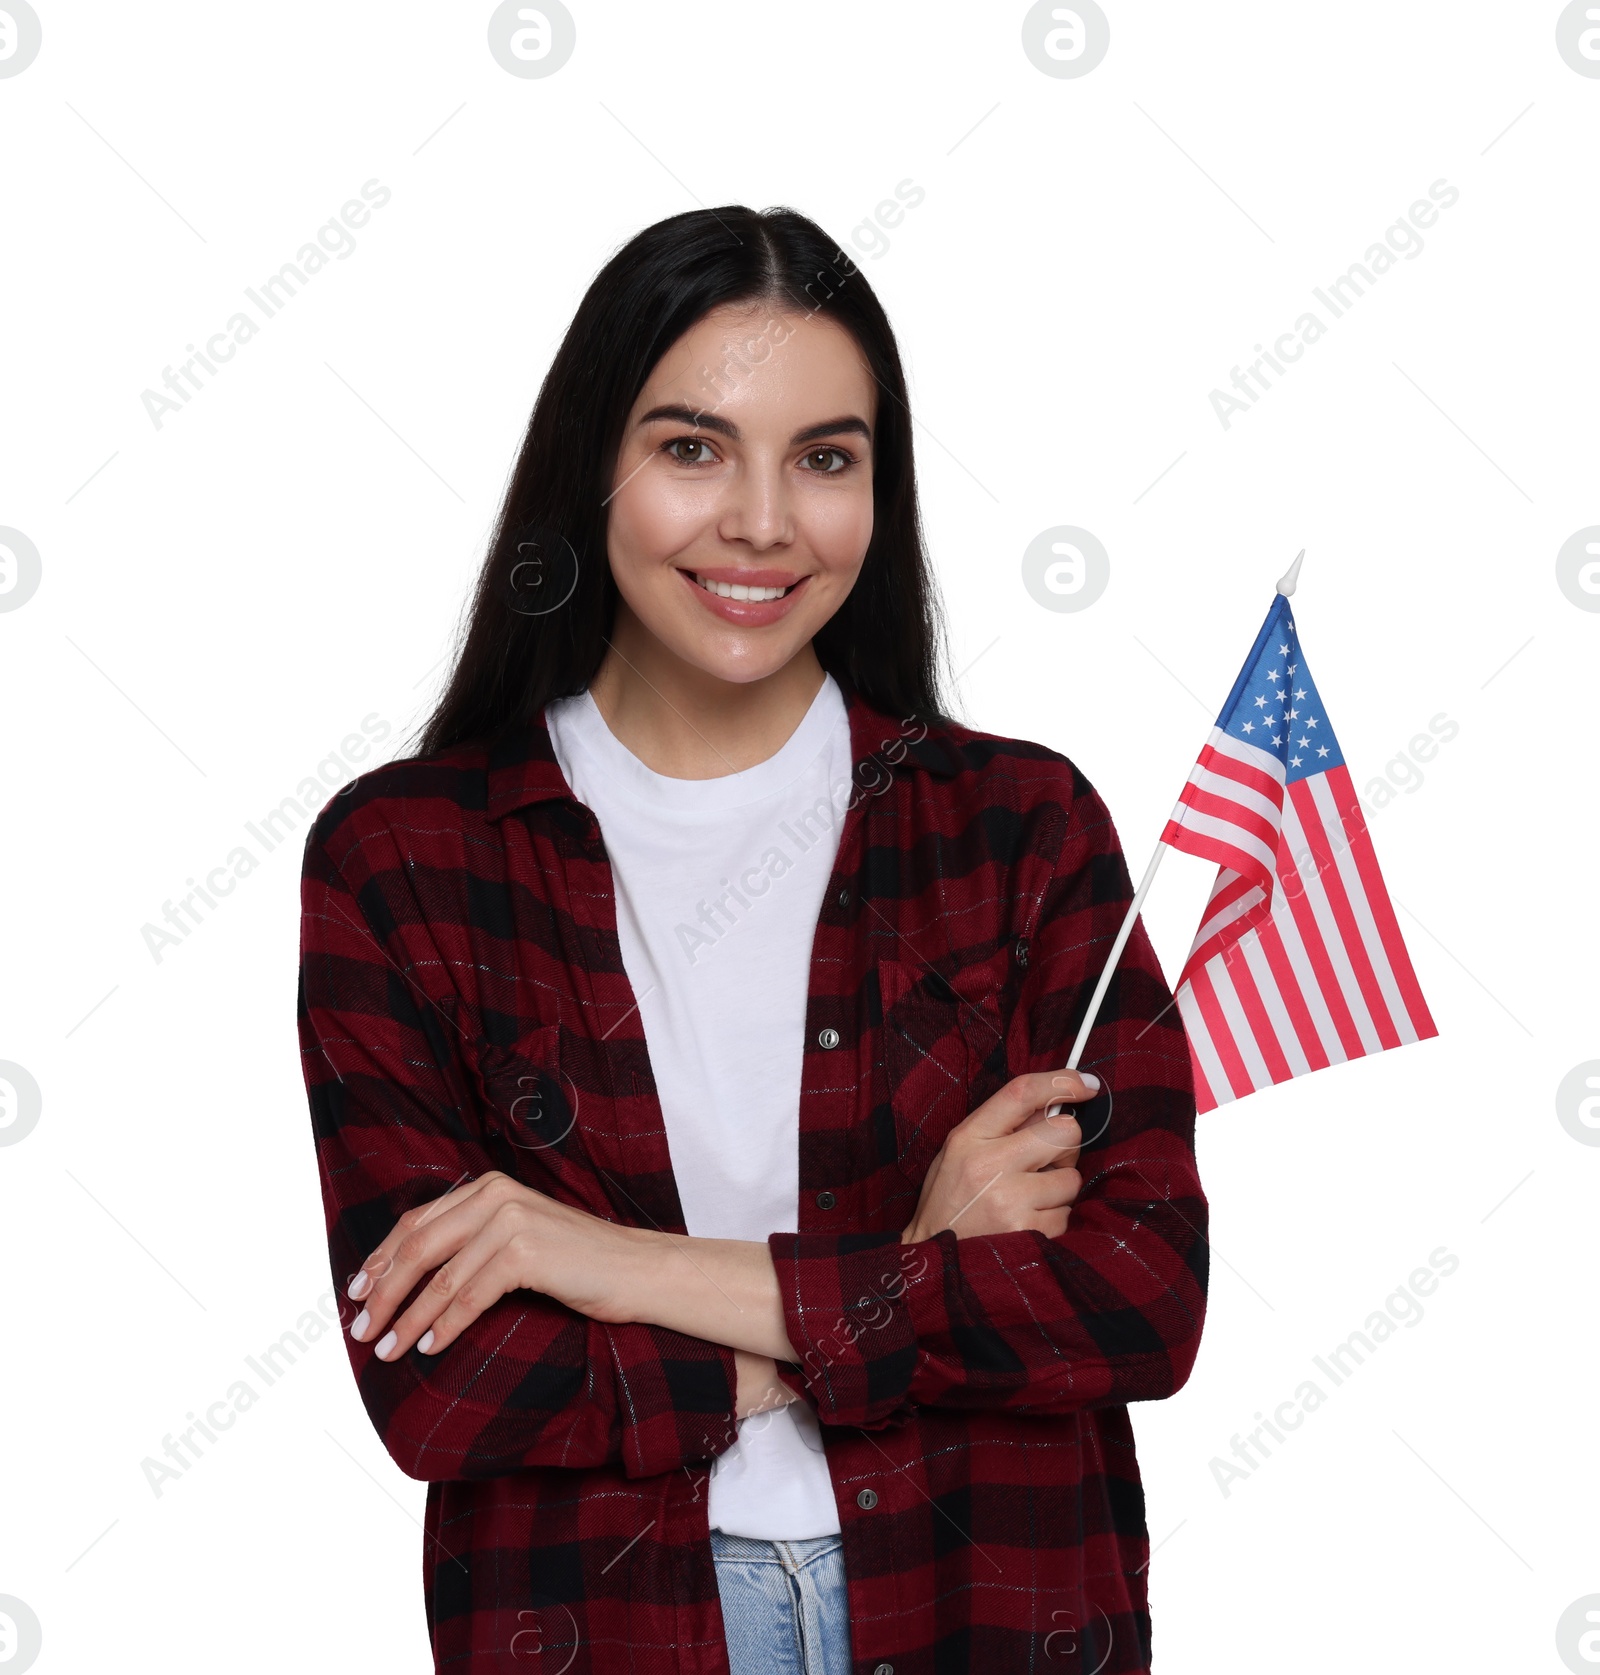 Image of 4th of July - Independence day of America. Happy young woman holding national flag of United States on white background